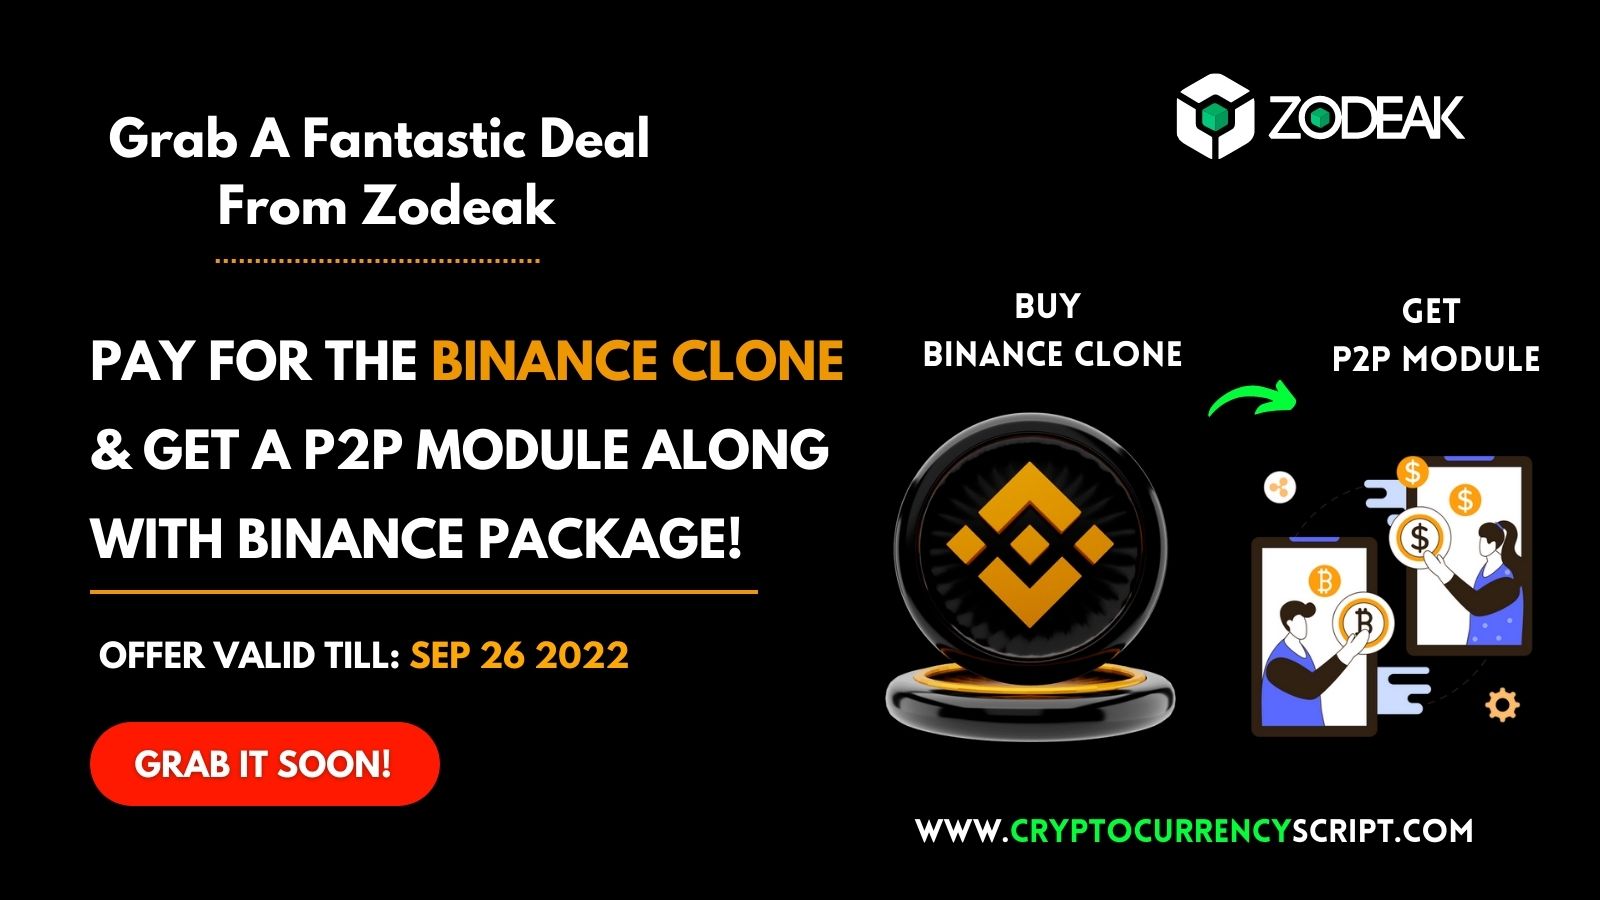 Pay For The Binance clone And Get A P2P Module Along With Binance Package